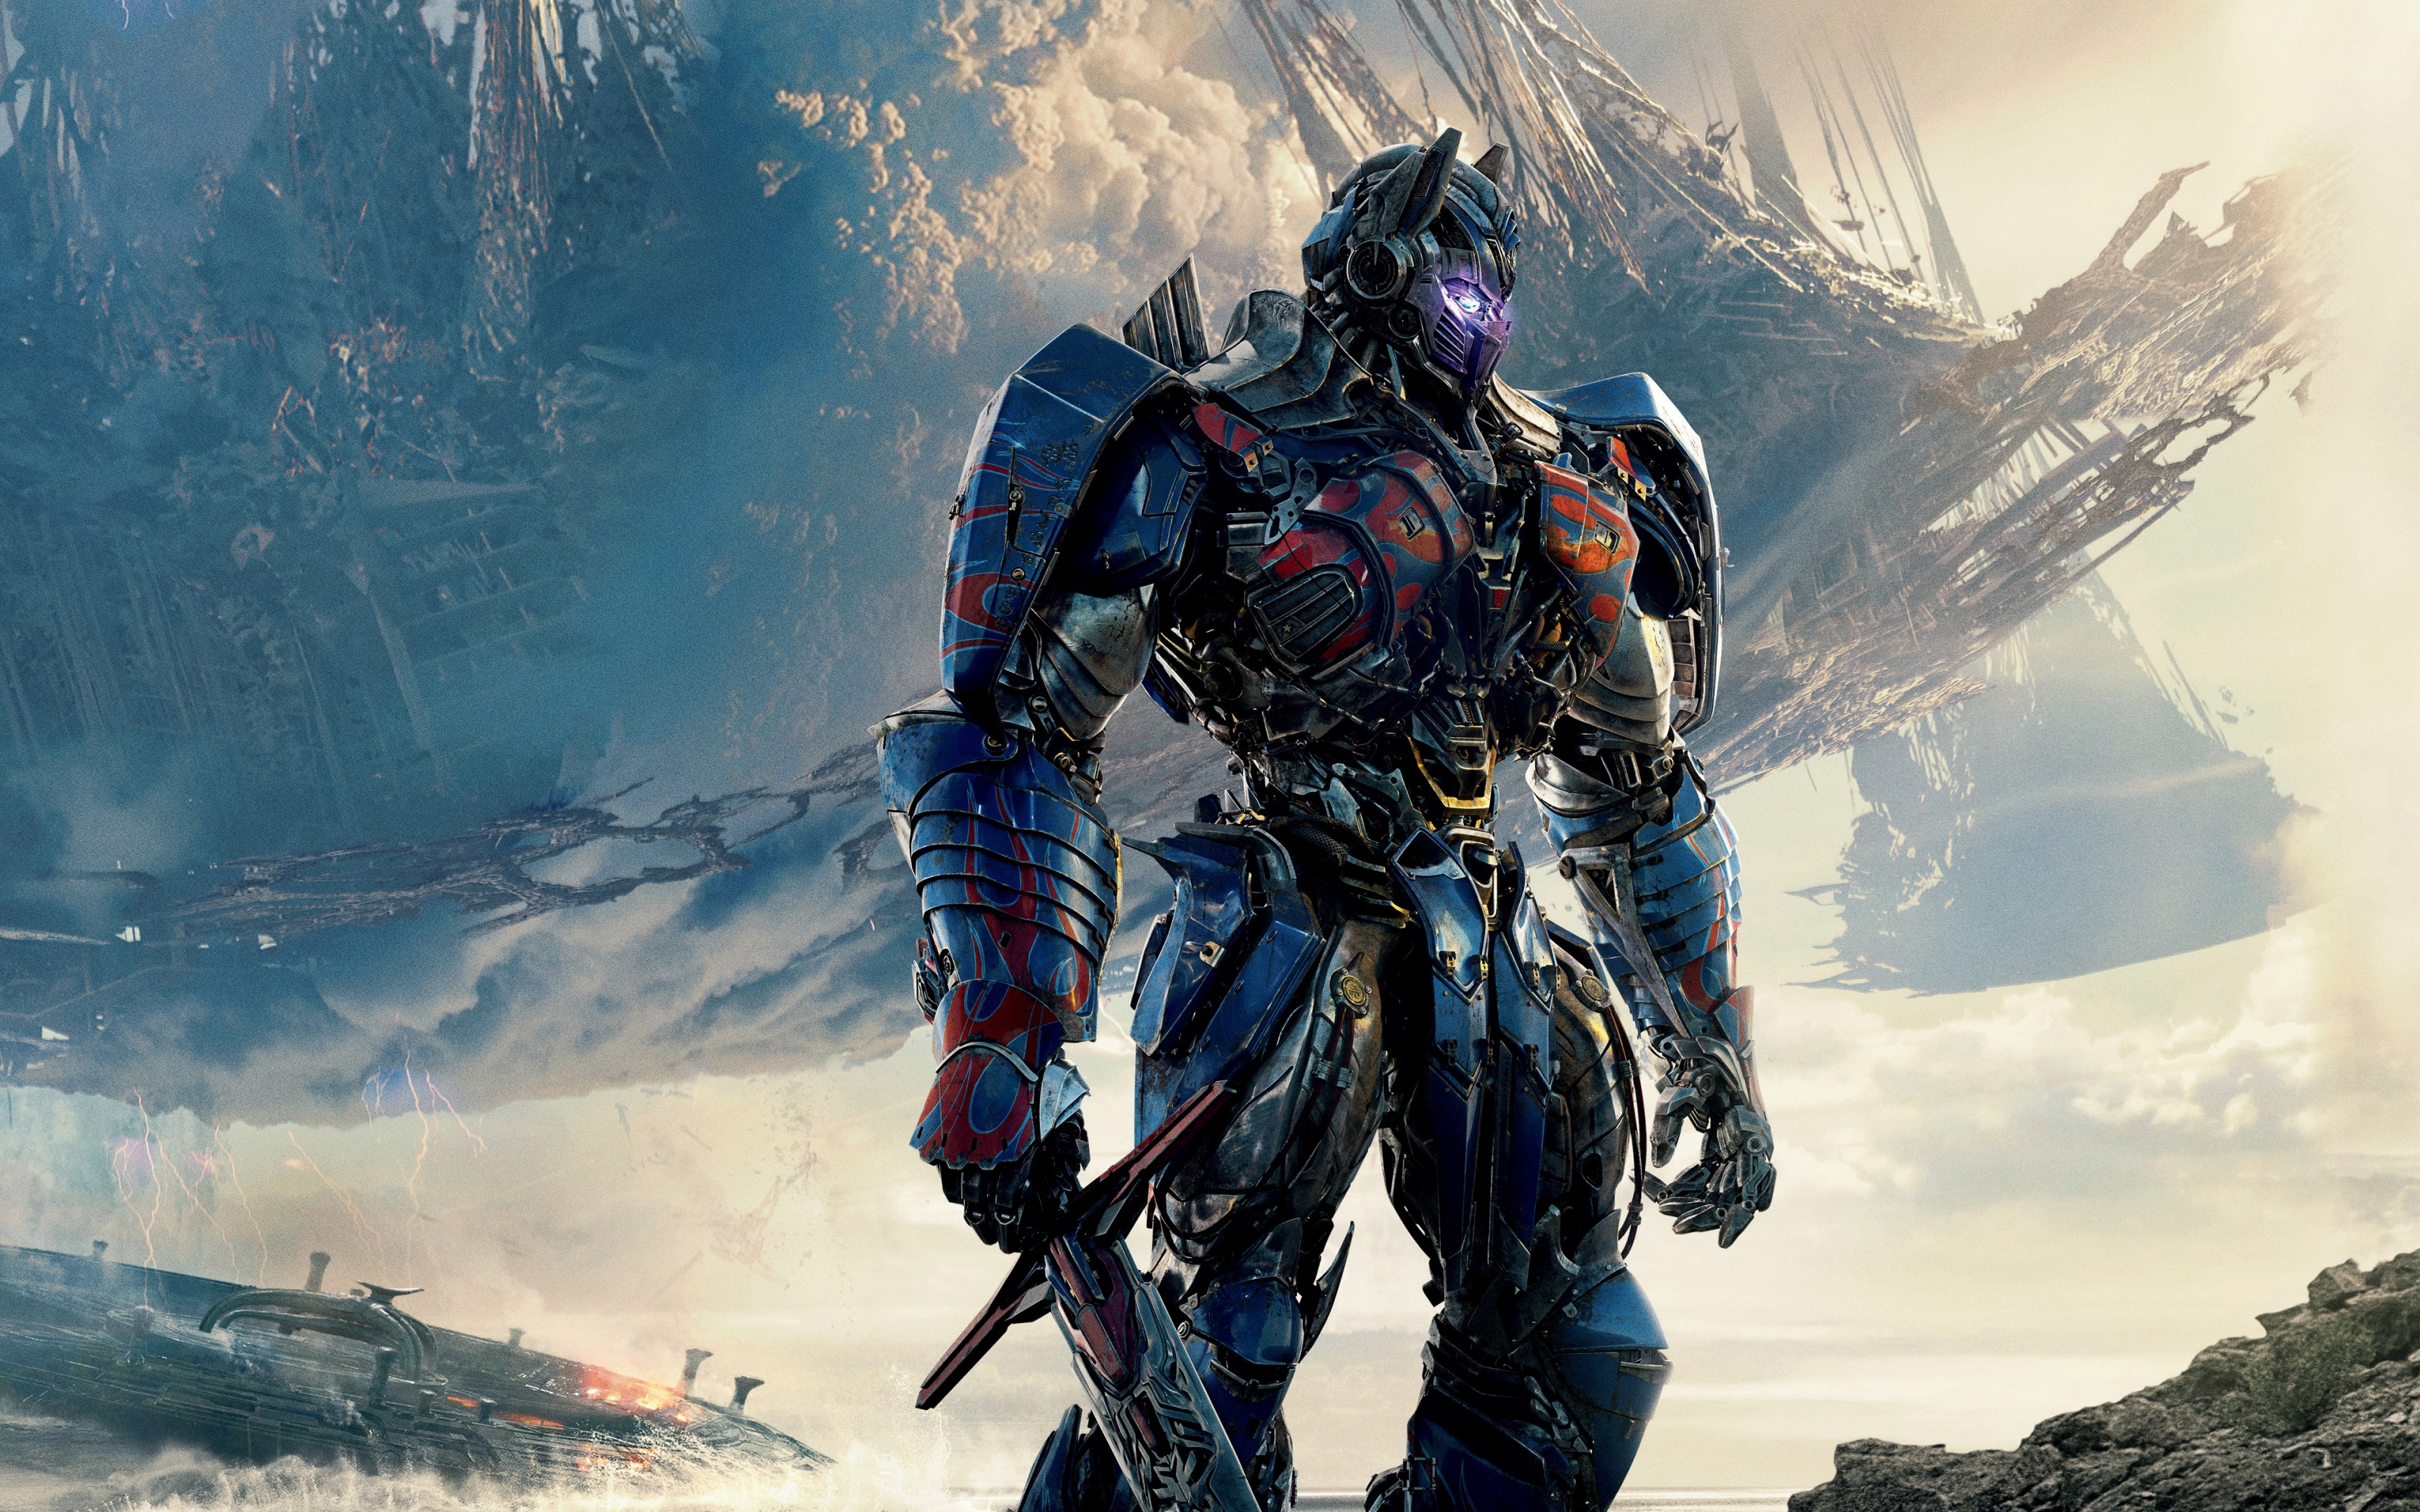 Optimus Prime Transformers The Last Knight for 3200 x 2000 Wide Retina Display resolution